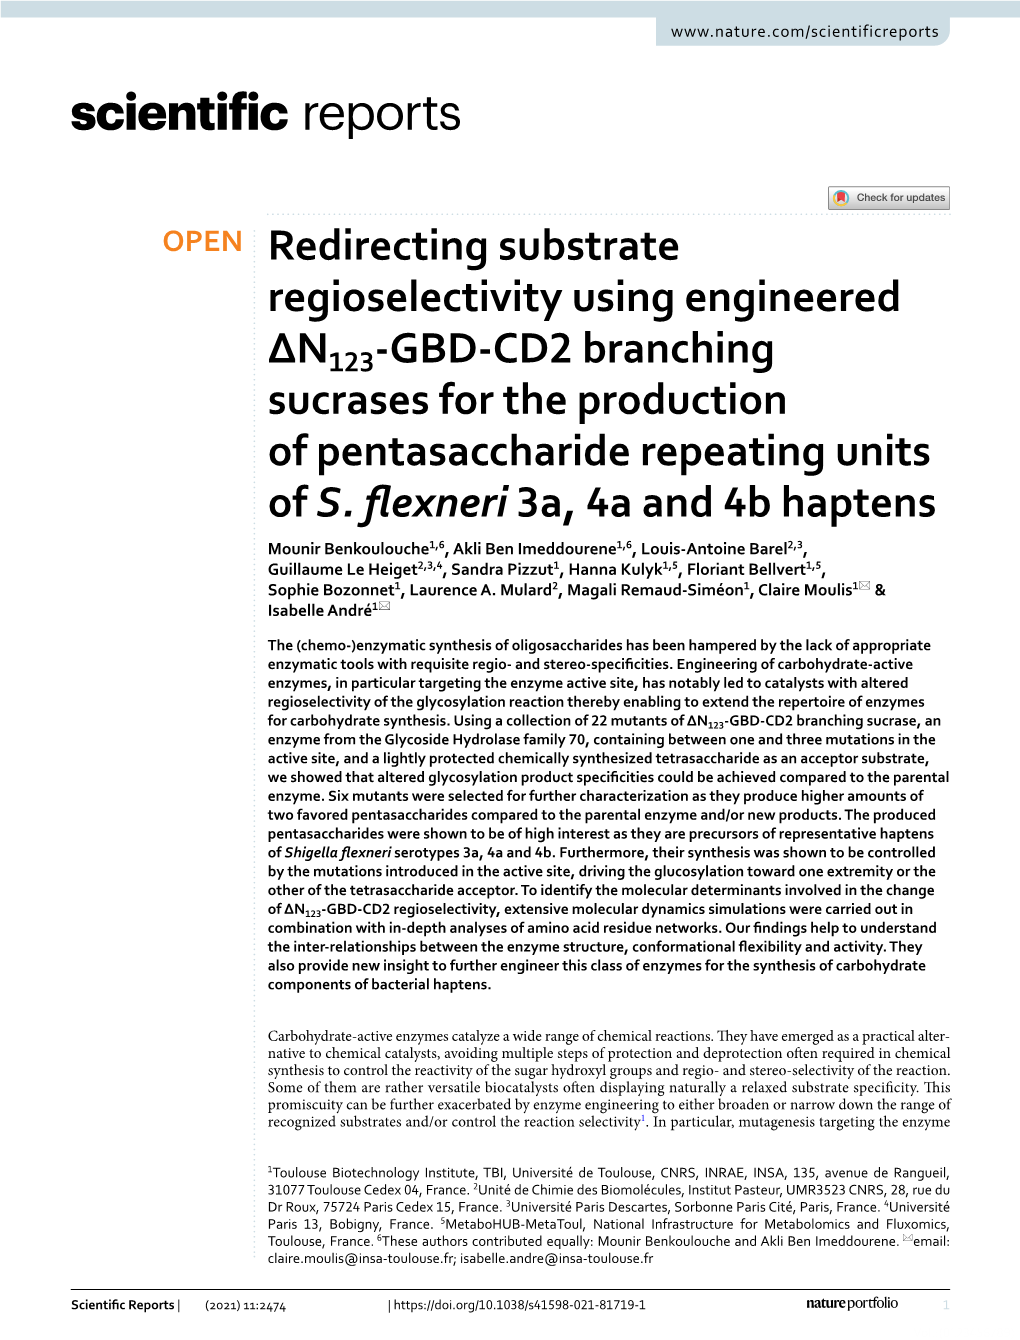 Redirecting Substrate Regioselectivity Using Engineered ΔN123-GBD